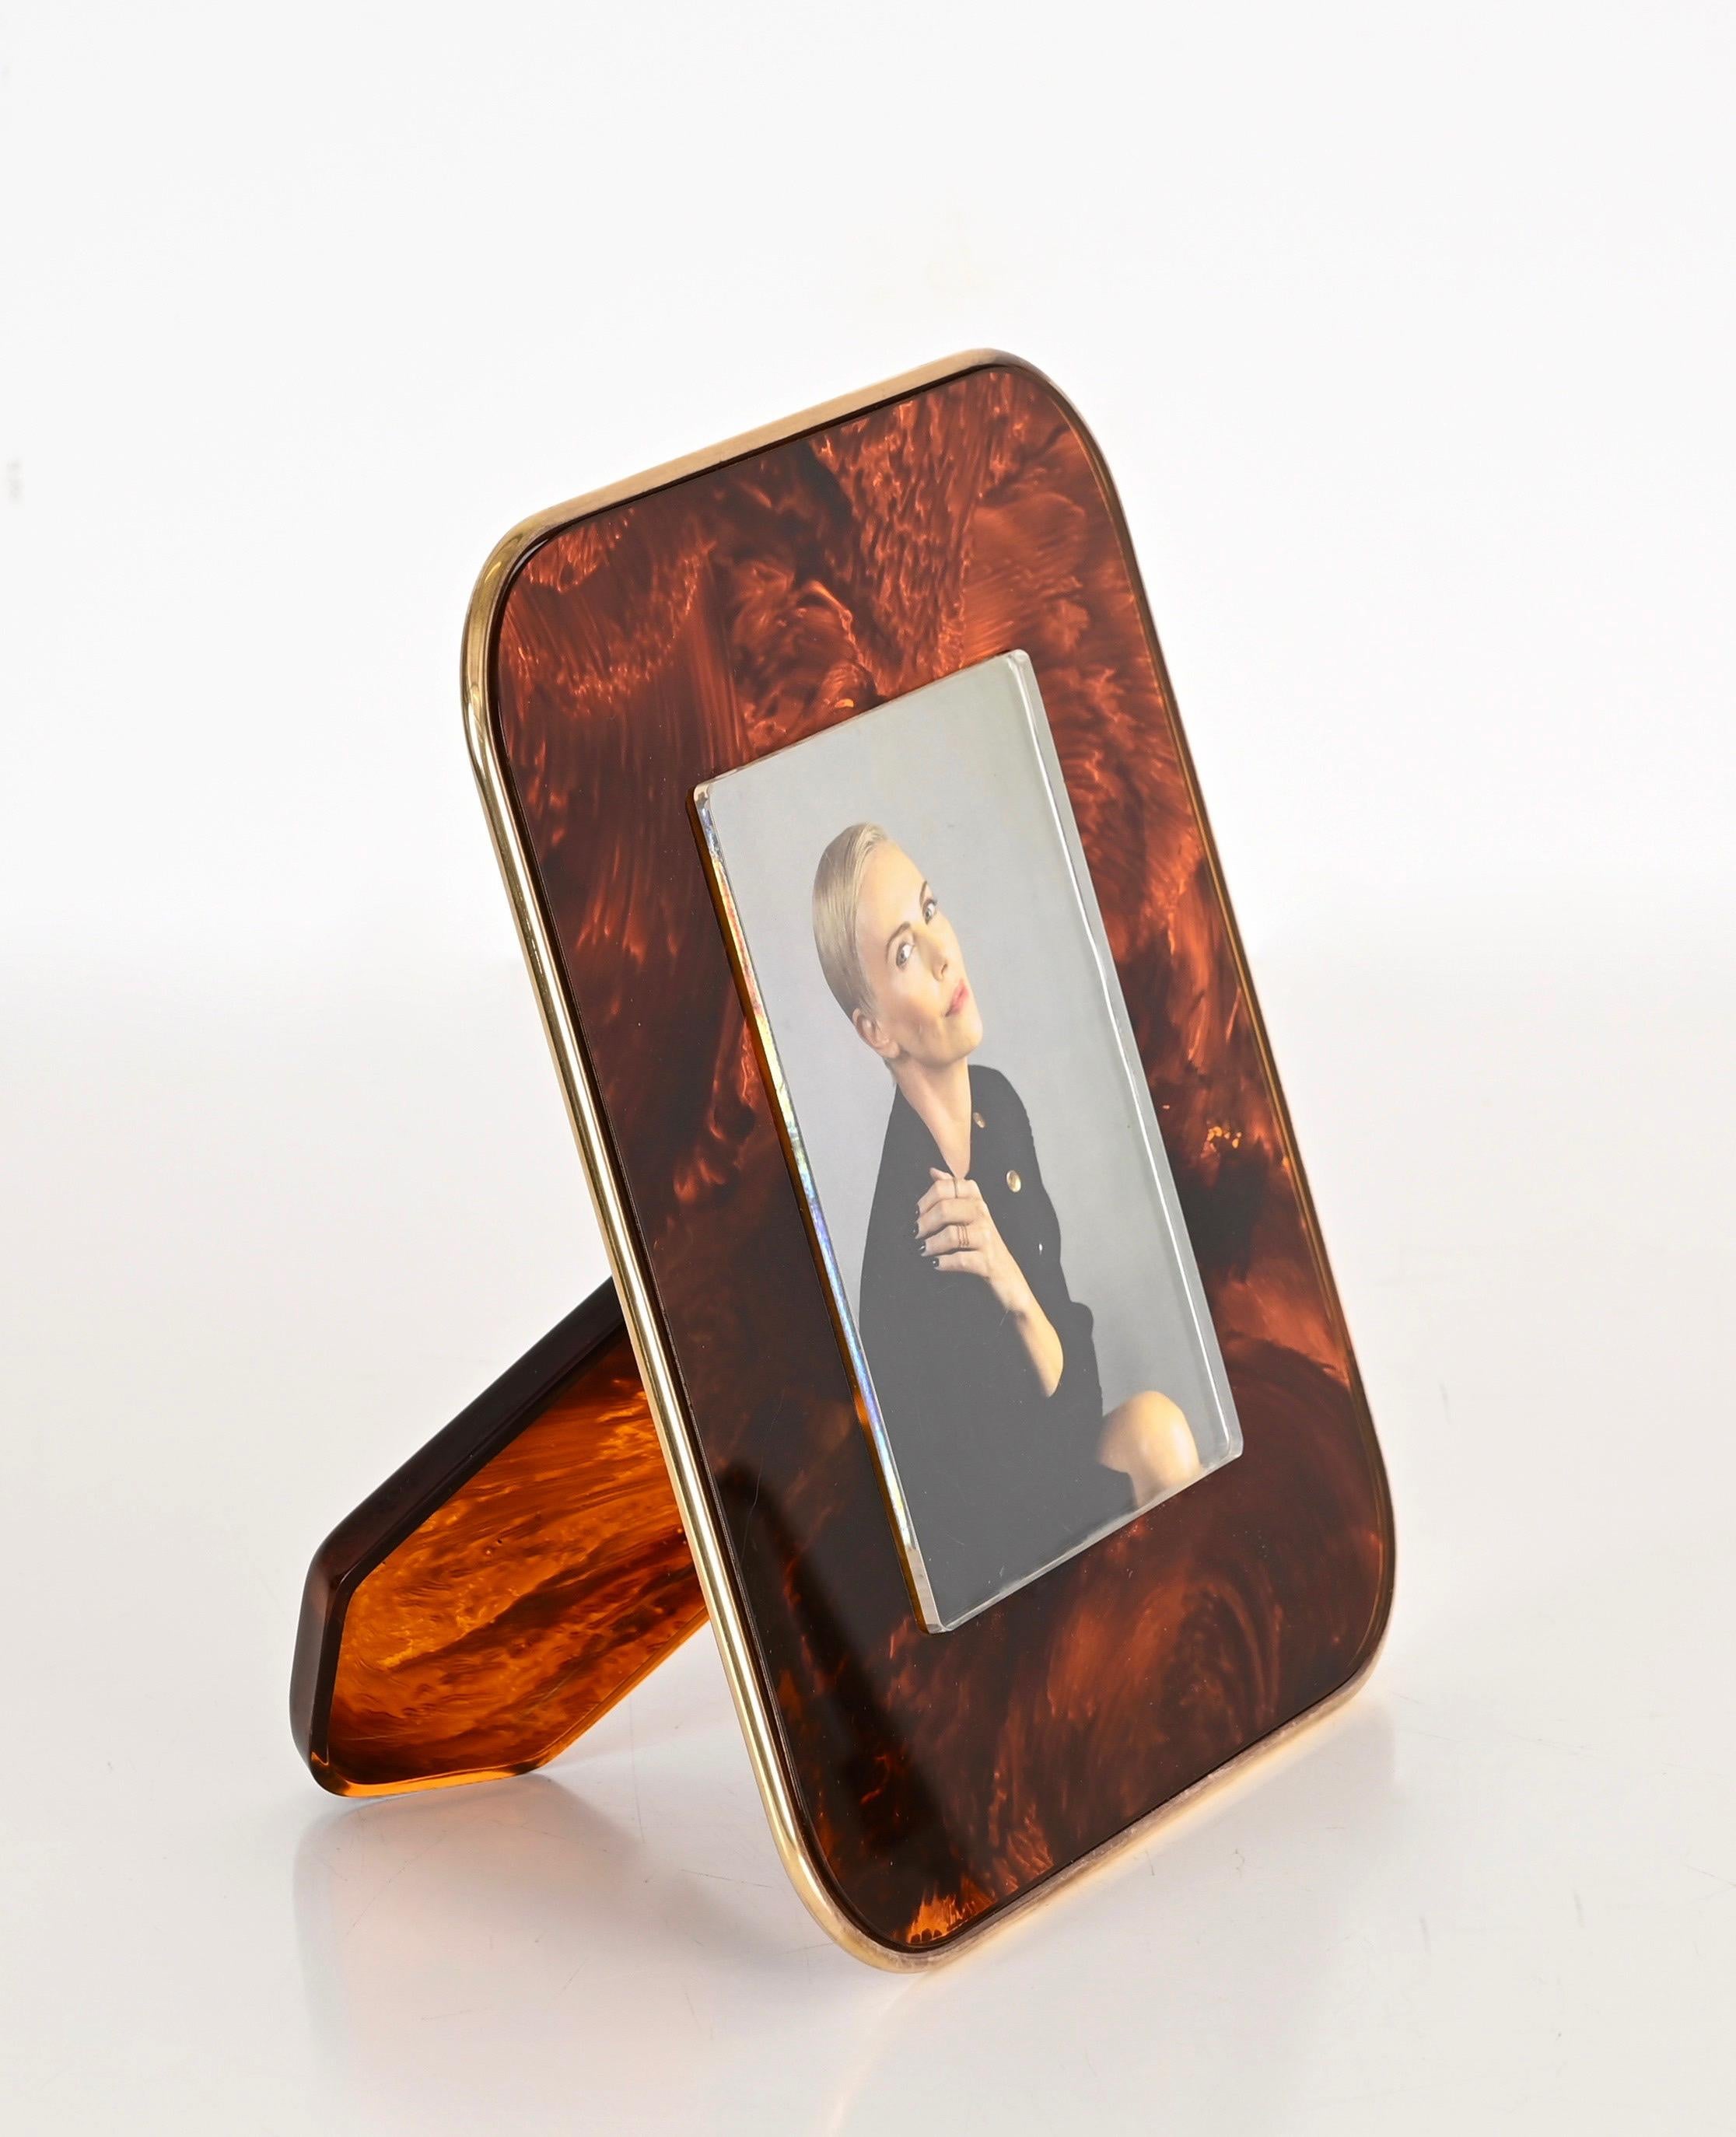 Fantastic Mid-Century photo frame in tortoiseshell effect lucite and brass. This incredibly charming piece was made in Italy during the 1970s, clearly in the style of Gabriella Crespi.

This unique photo frame can stand either horizontally and